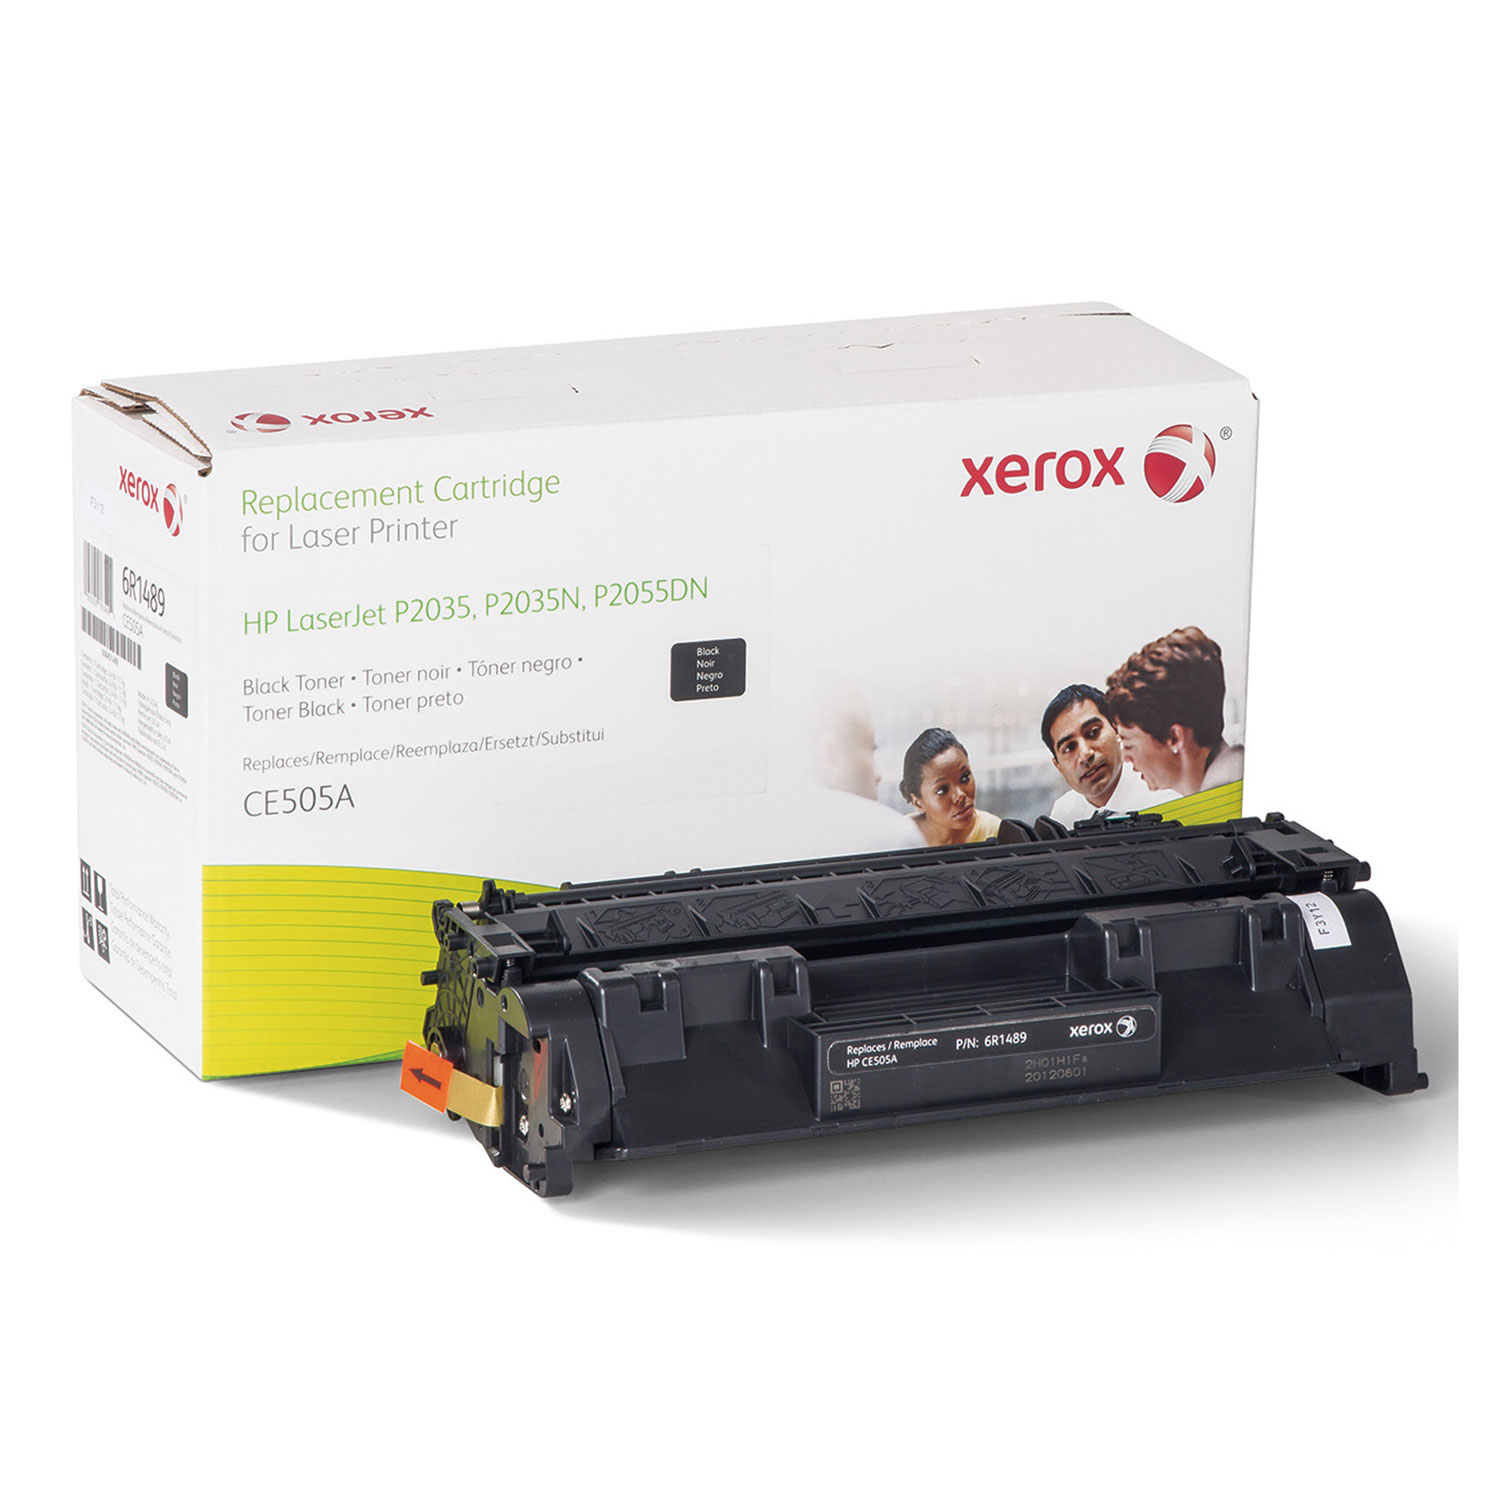  Xerox 006R01489 006R01489 Replacement Toner for CE505A (05A), Black (XER006R01489) 